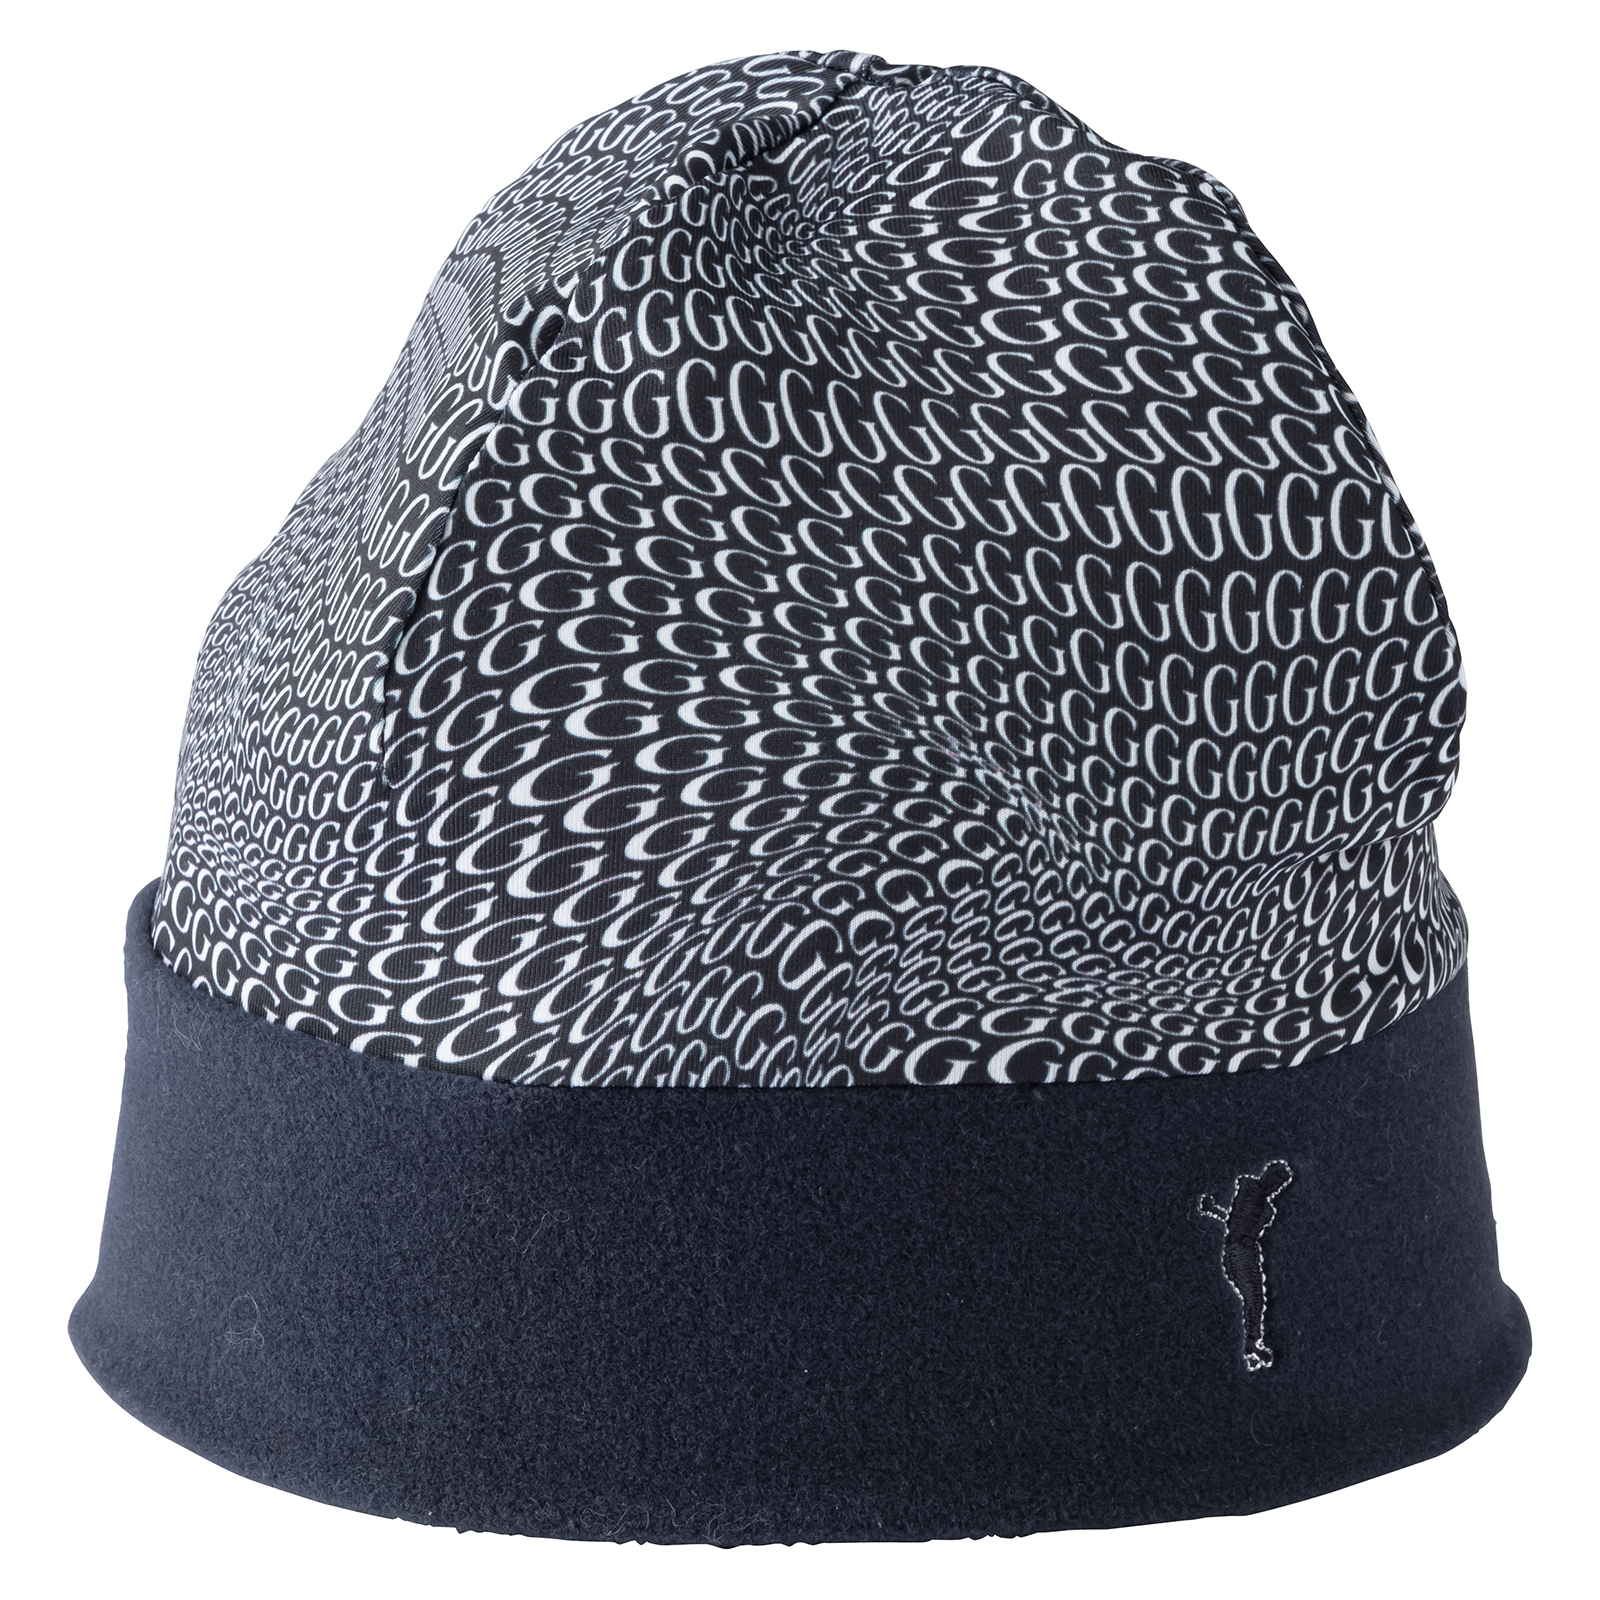 Fashionable ladies' golf beanie with cold weather protection